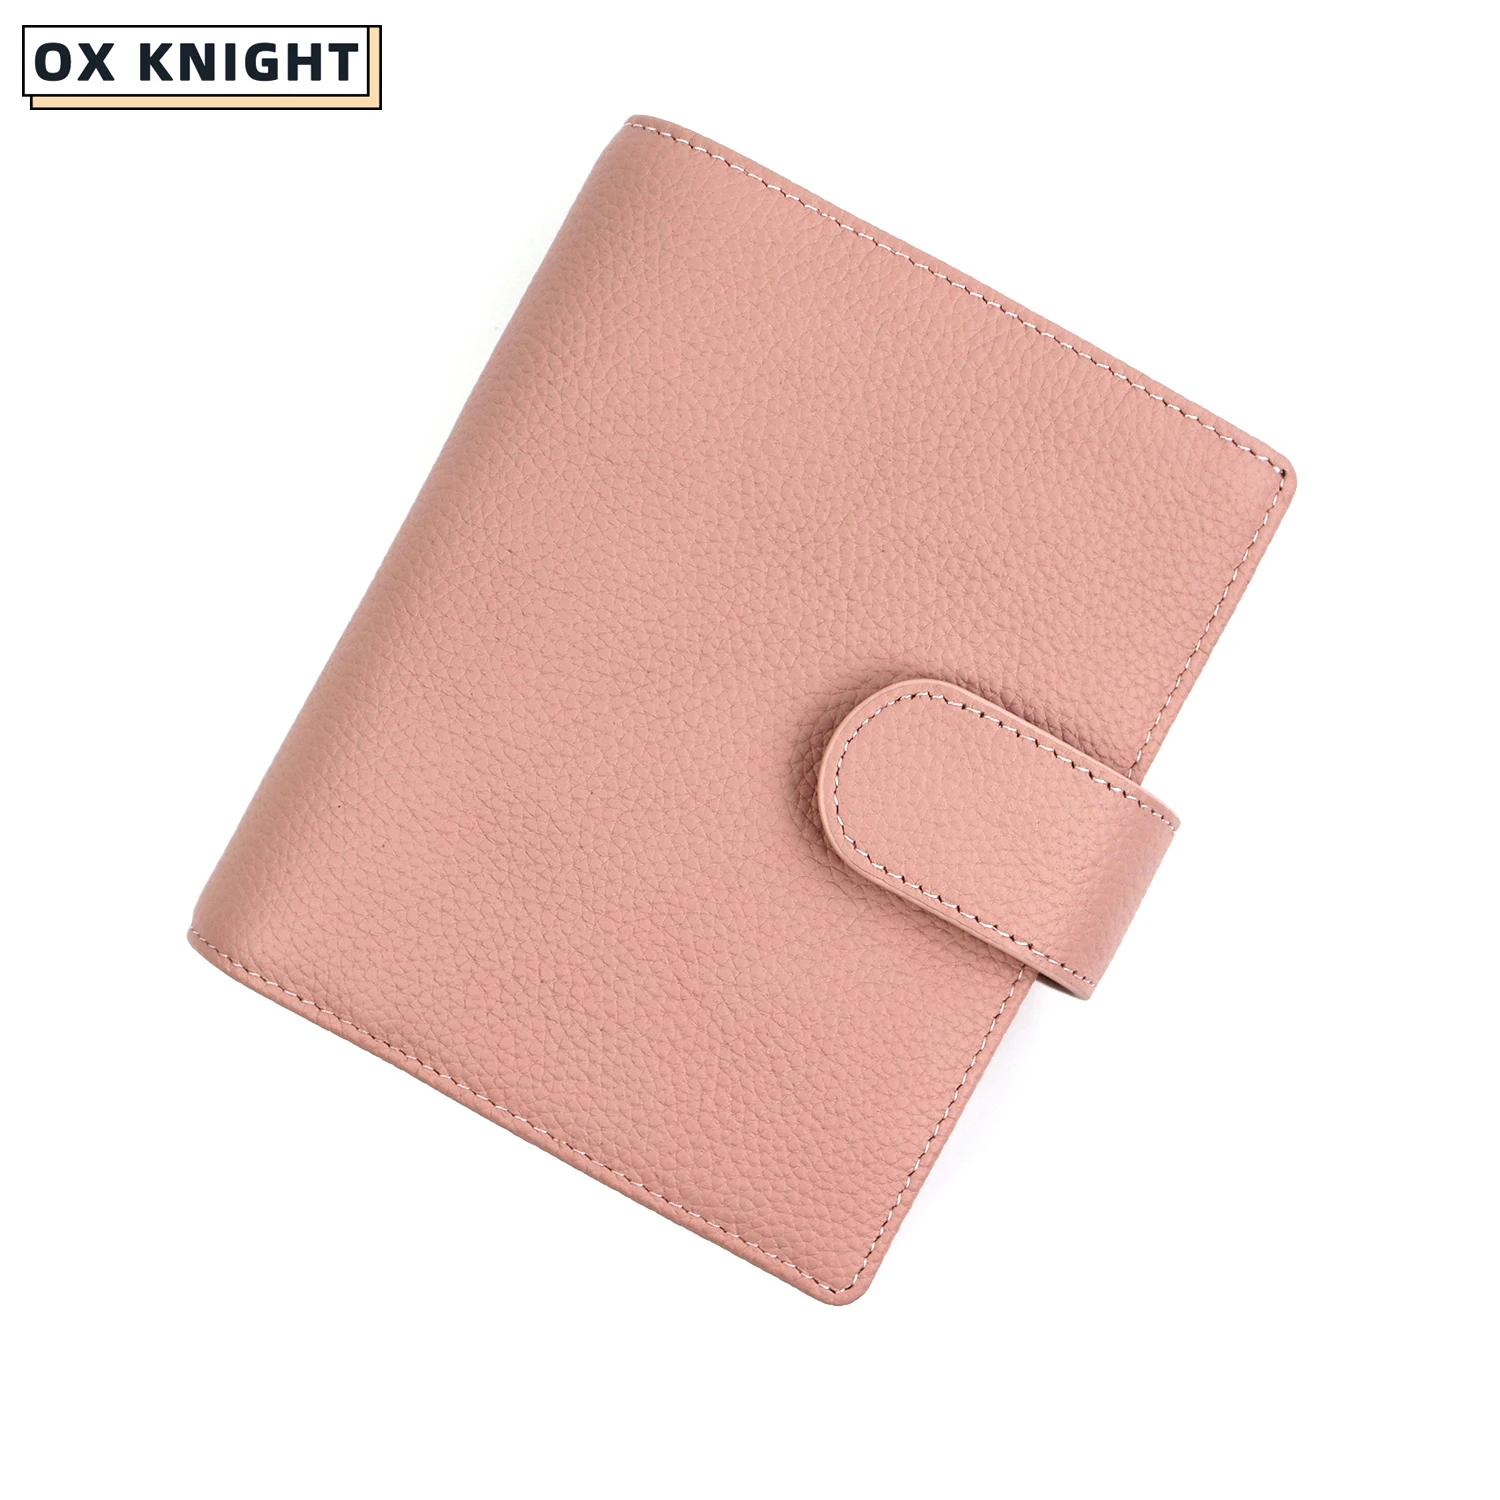 OX KNIGHT Genuine A7 Binder Notebook Zip Cover With Top Pocket Cowhide Planner Education Office Supplies Business Notebook